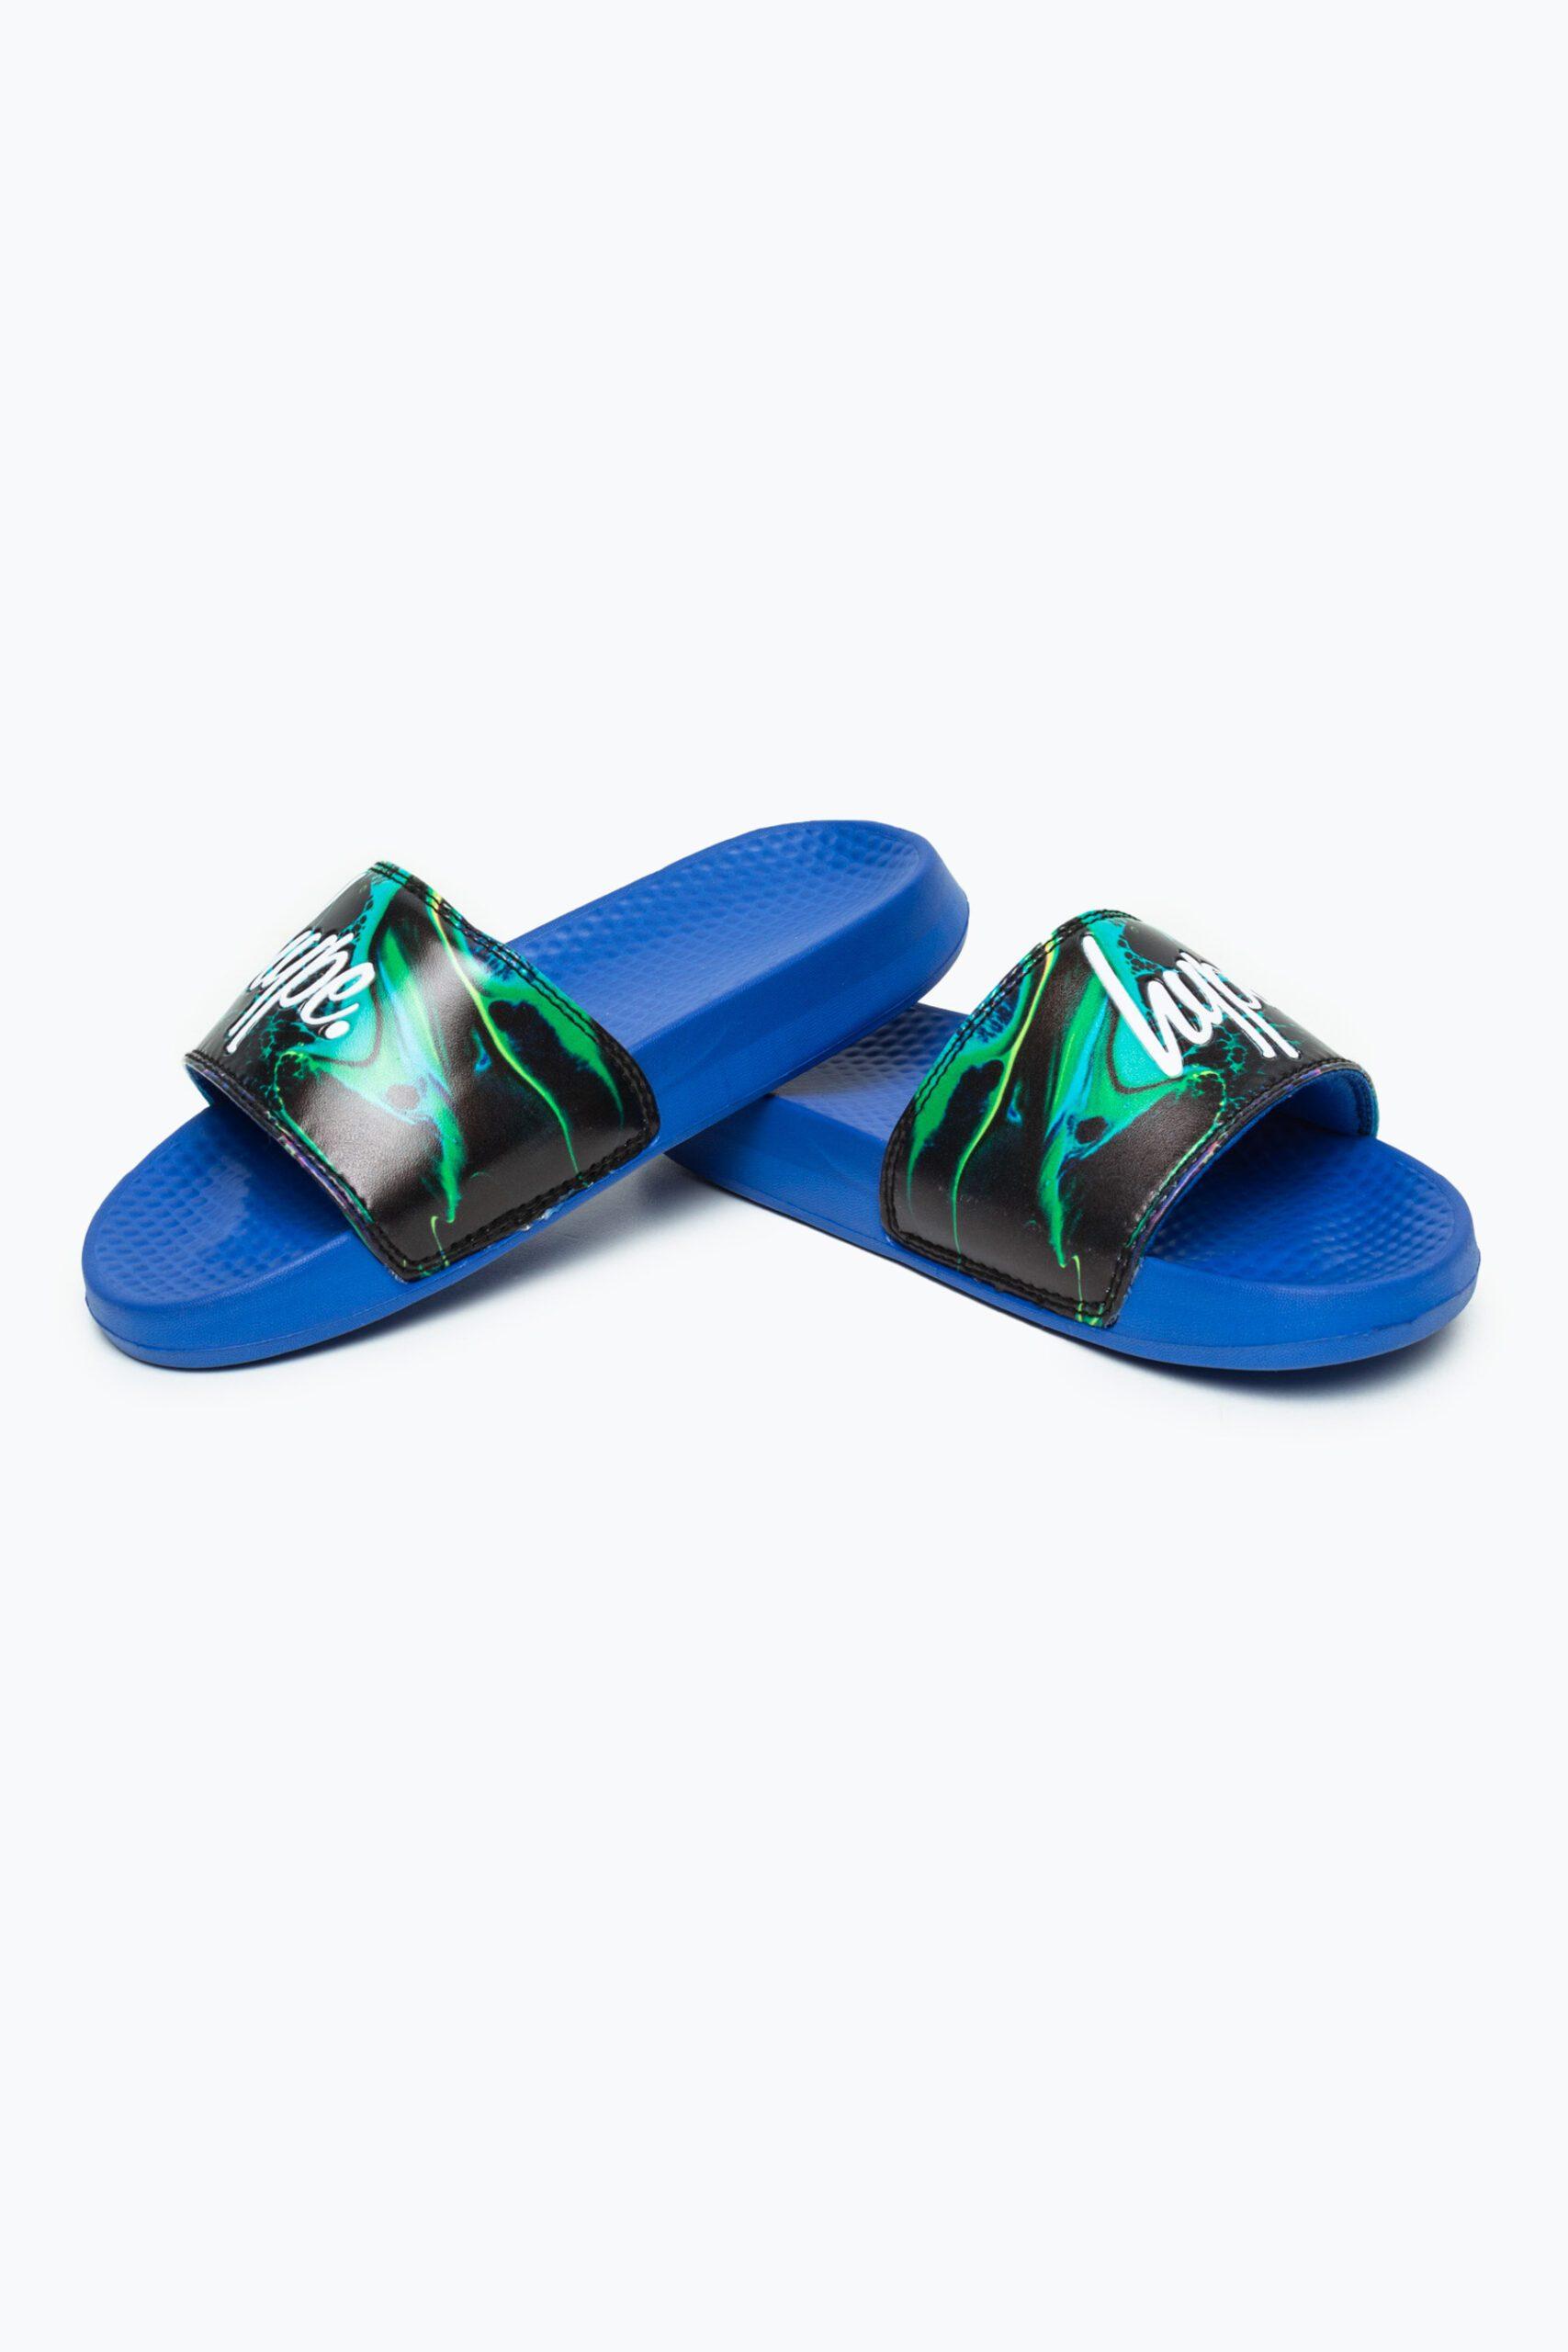 Hype multi coloured blue marble sliders laid one on top